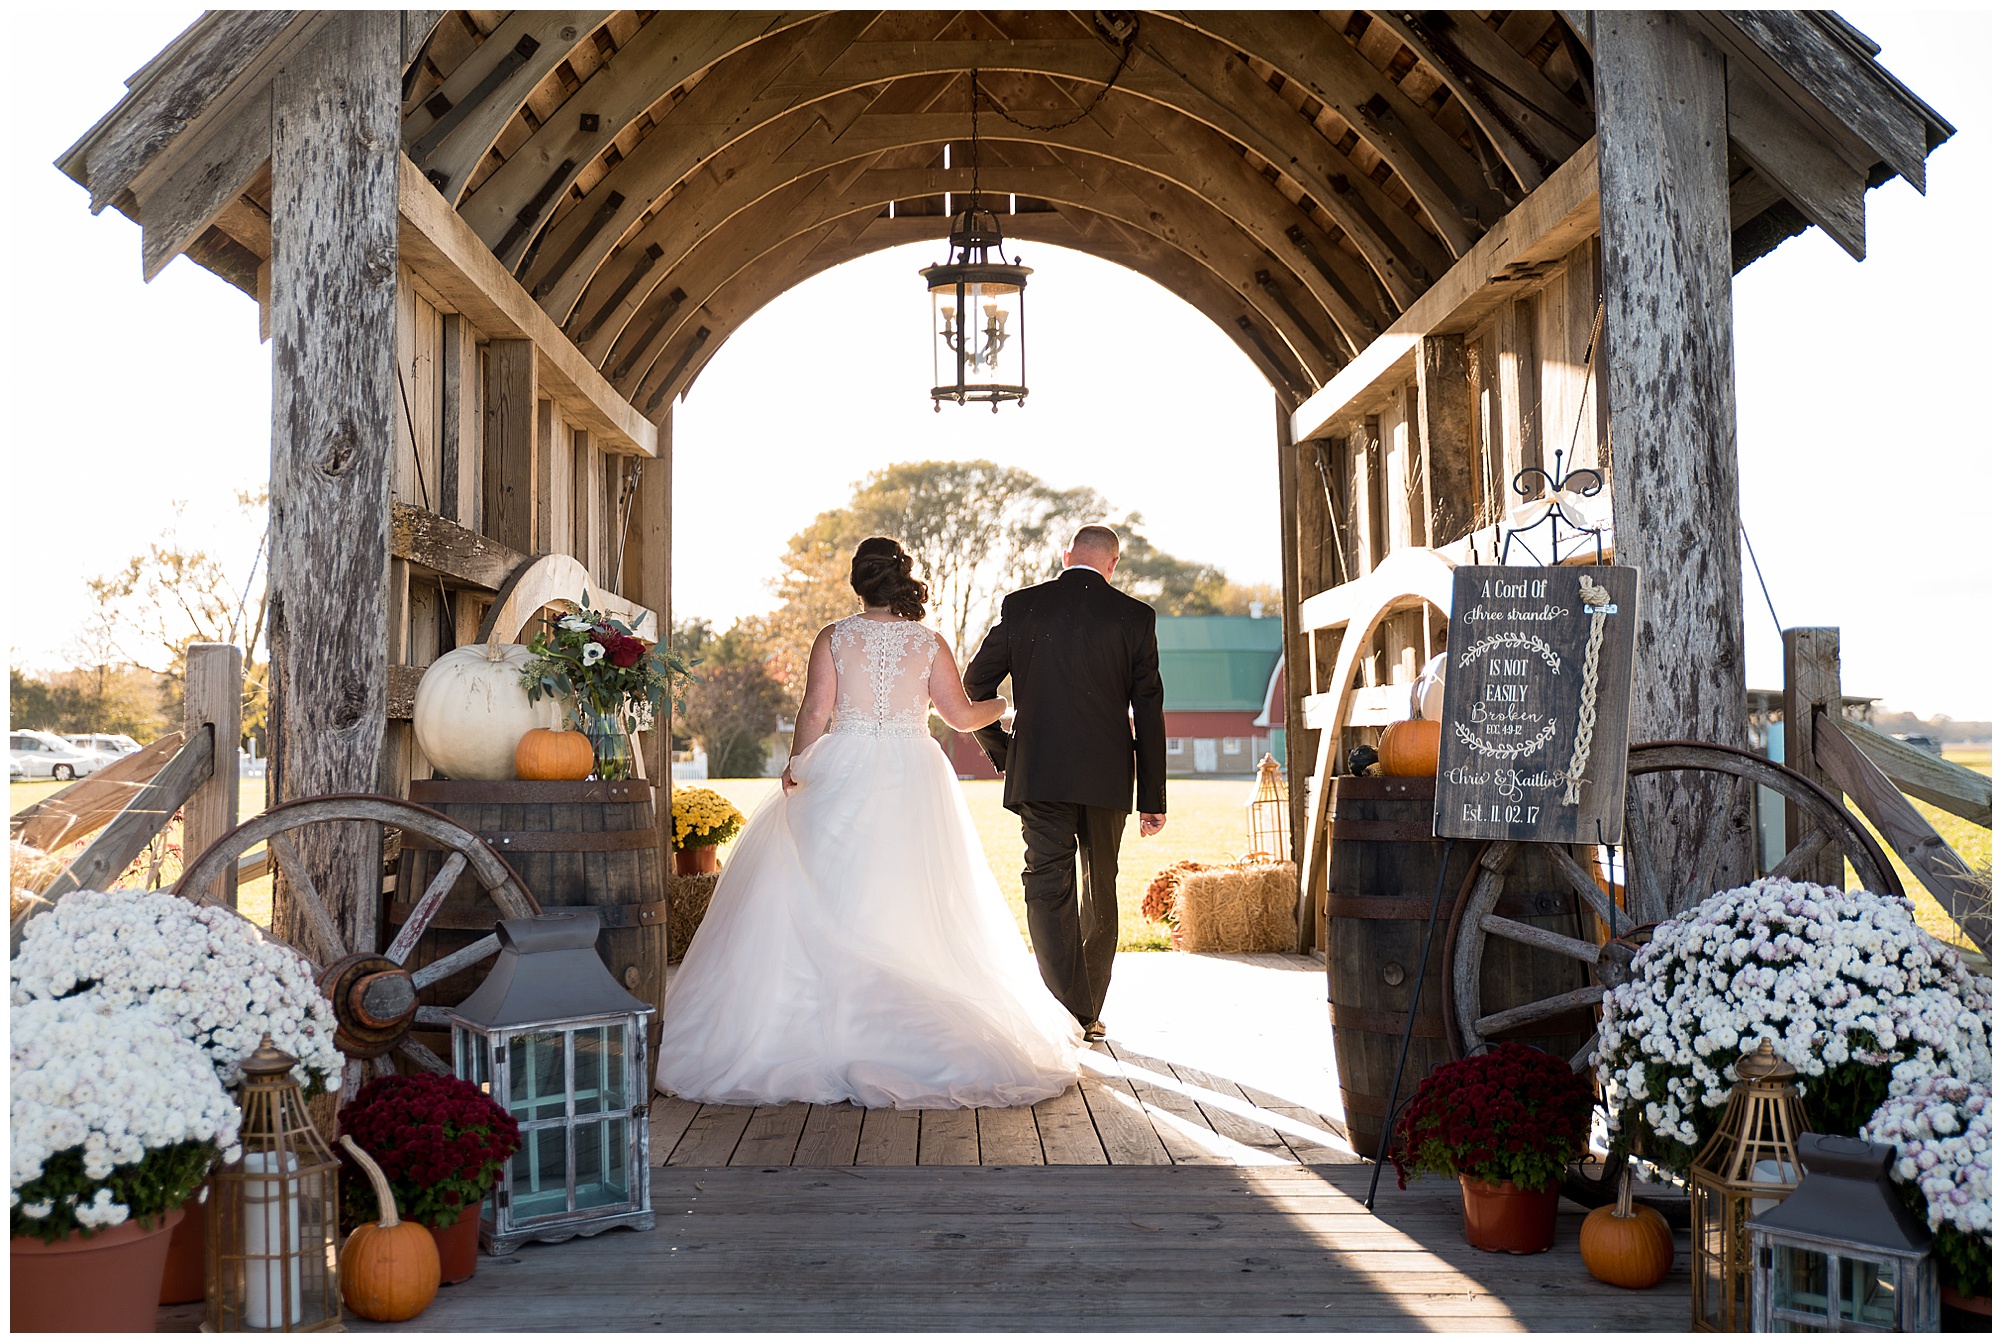 wedding photos outdoors at covered bridge inn in lewes delaware. historic wedding barn venue on the eastern shore. fall wedding in november with rustic decor theme.